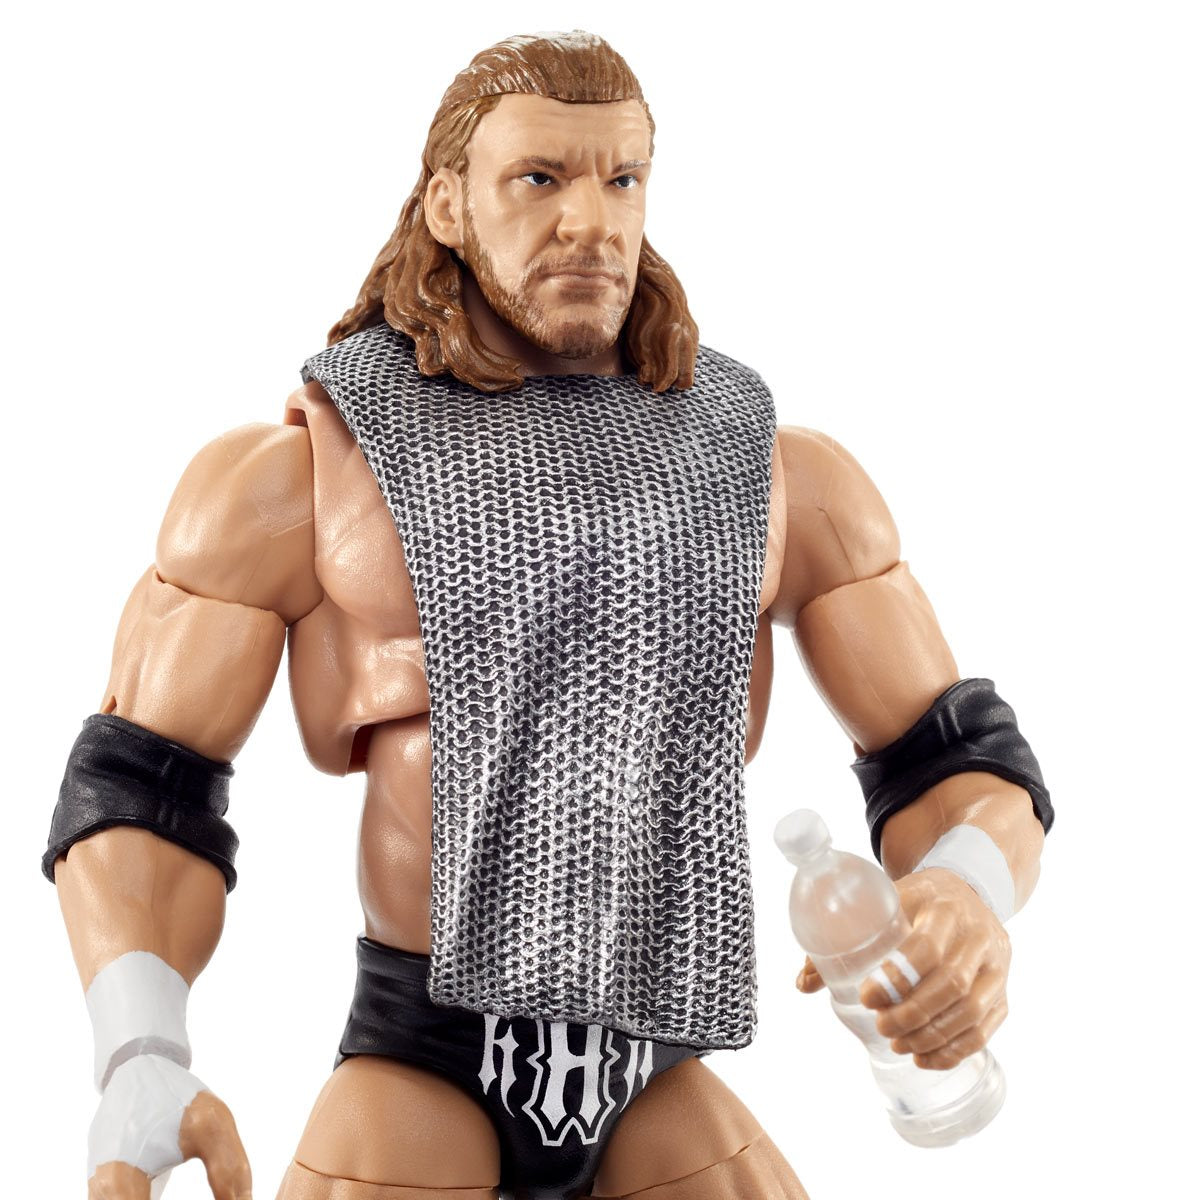 [Pre-Order] WWE Ultimate Edition Best Of Wave Triple H Action Figure Toy